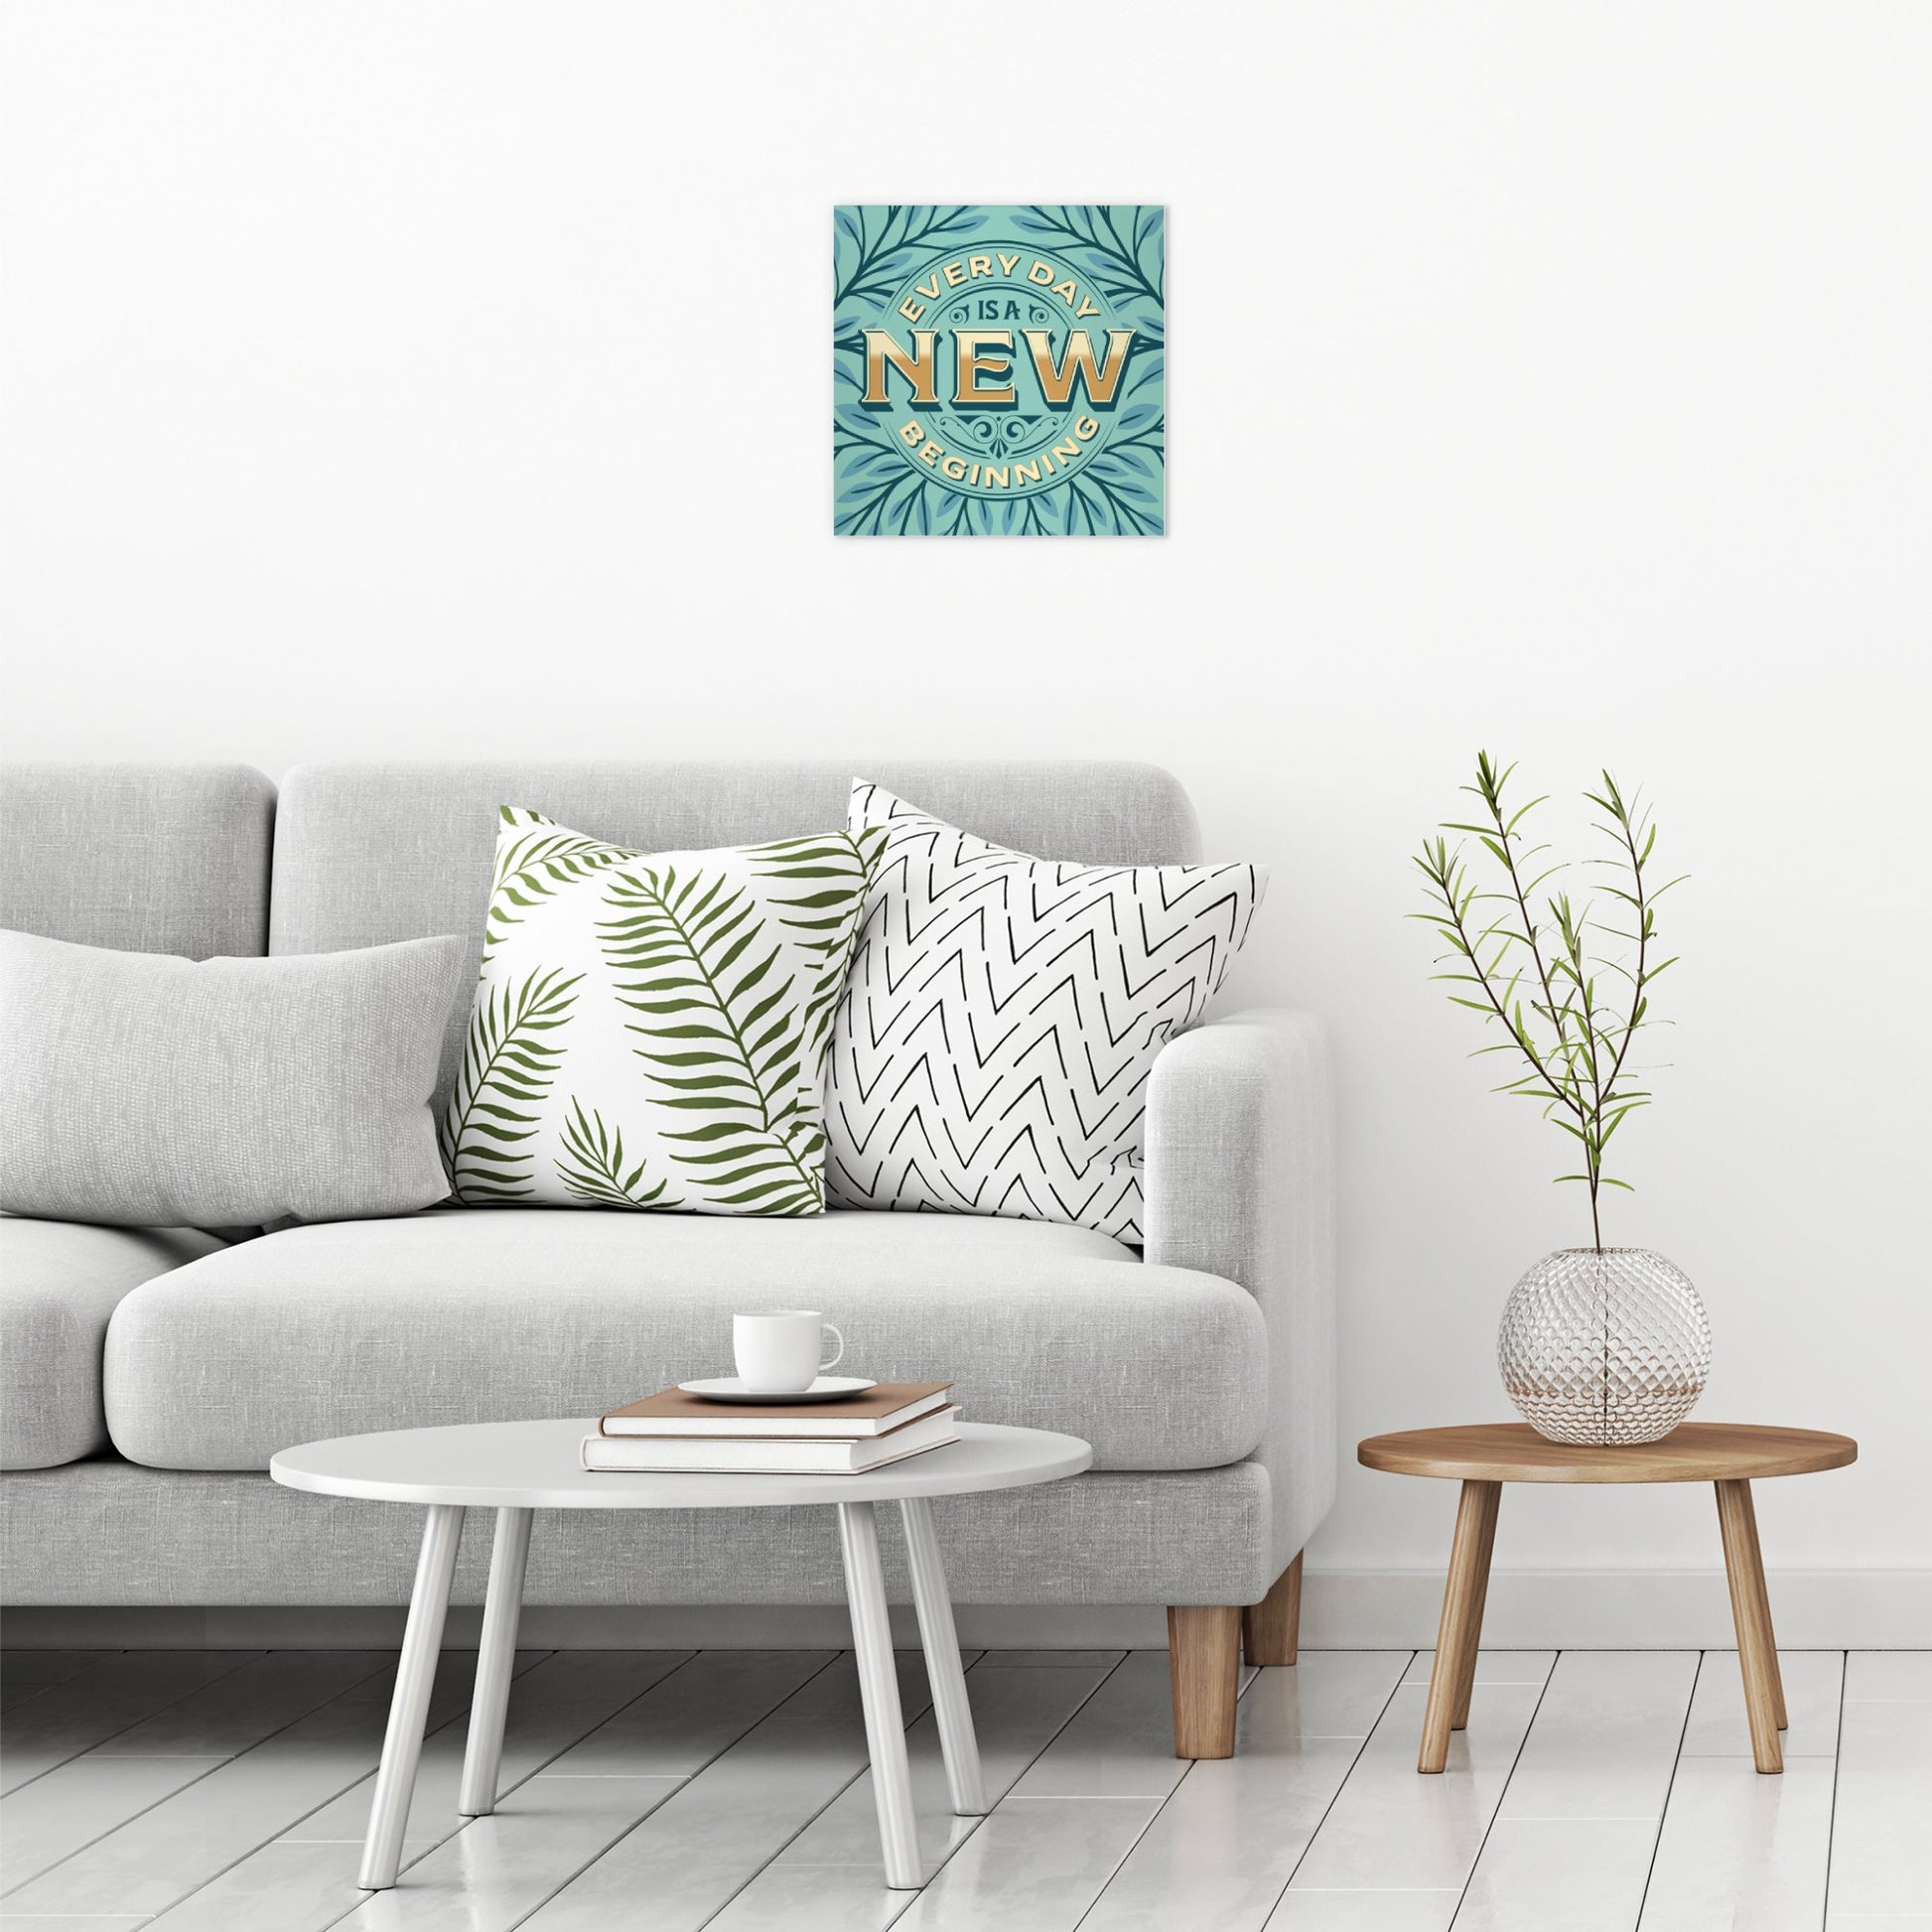 A contemporary modern room view showing a medium size metal art poster display plate with printed design of a Every Day is A New Beginning Quote